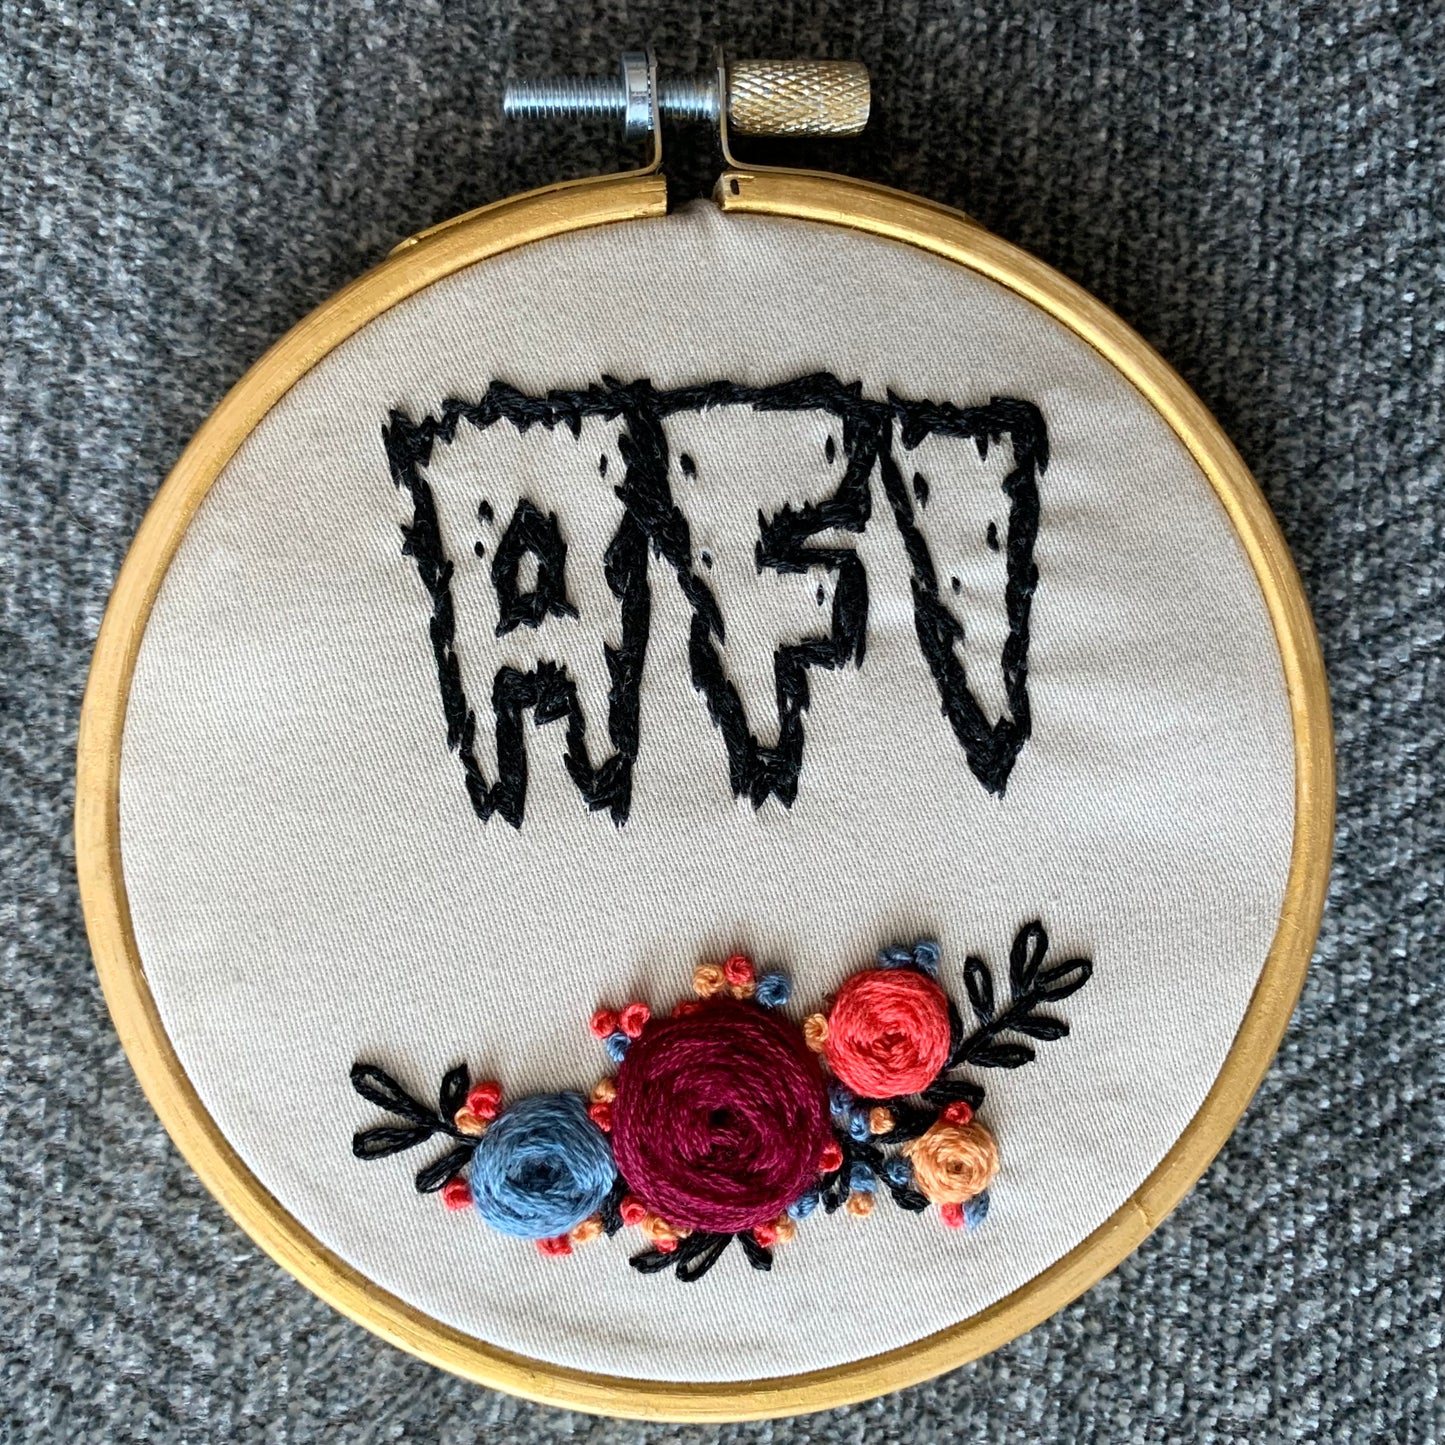 another view of embroidery hoop, AFI A Fire Inside